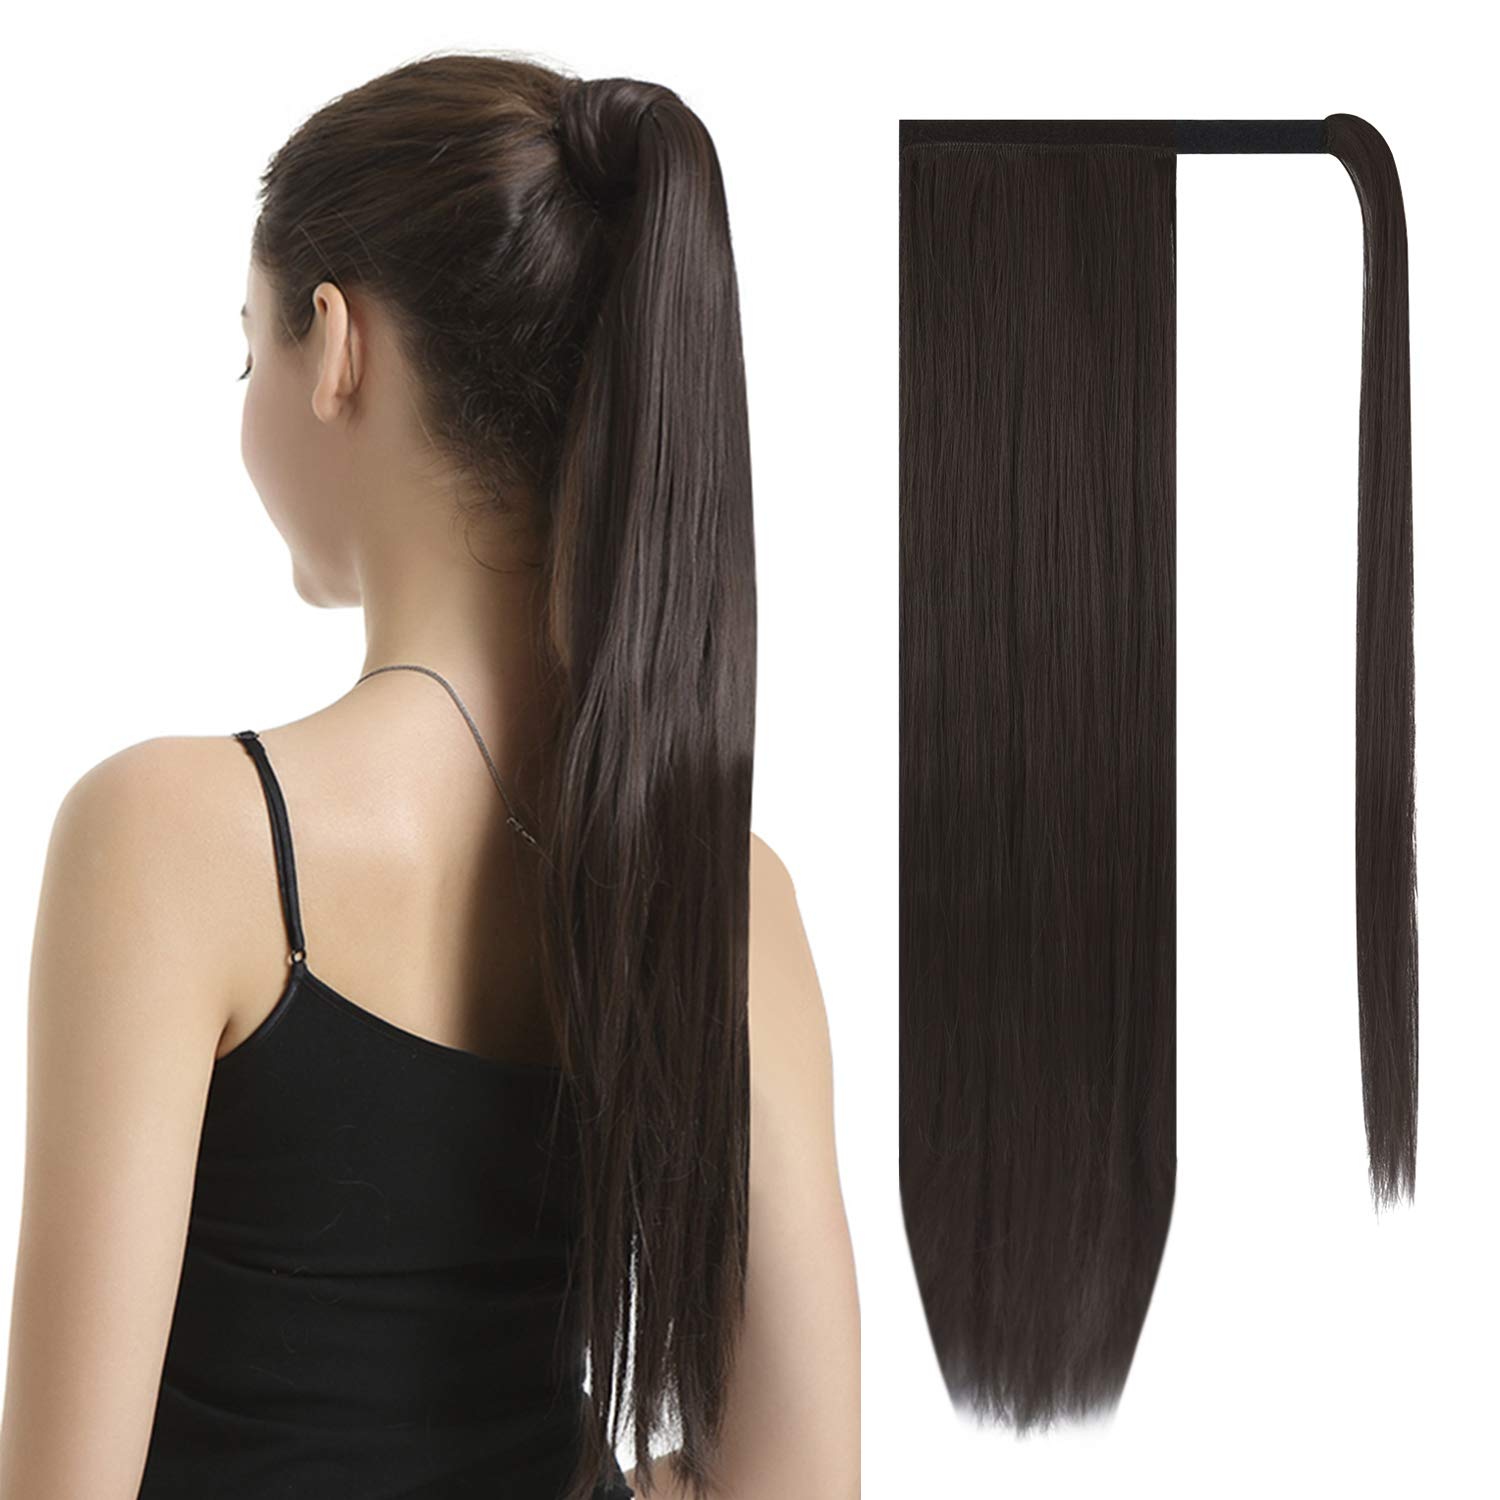 BARSDAR 26 inch Ponytail Extension Long Straight Wrap Around Clip in Synthetic F